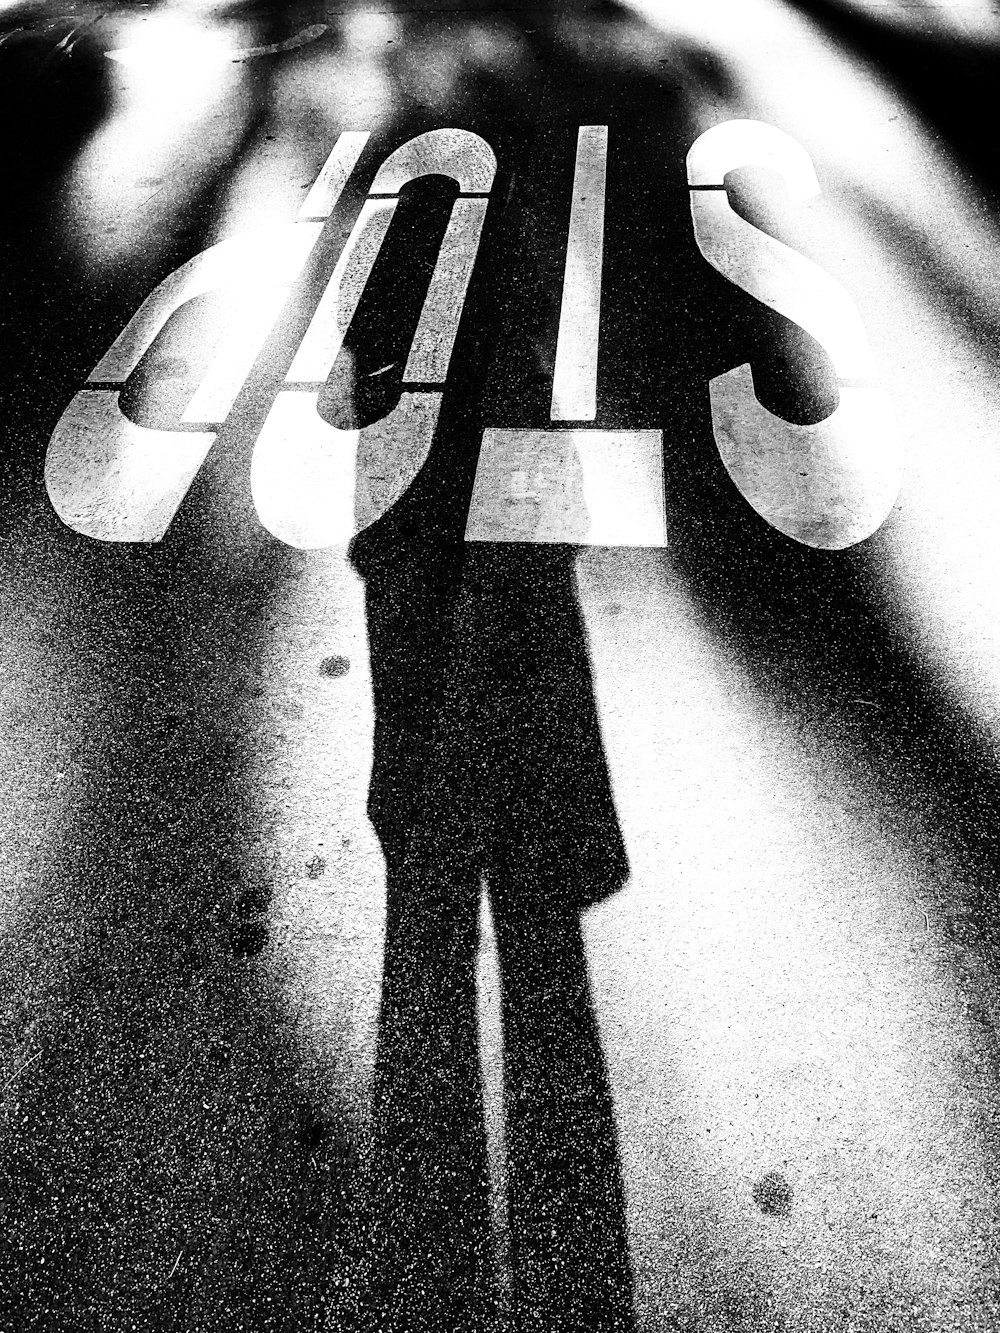 a shadow of a person standing next to a stop sign